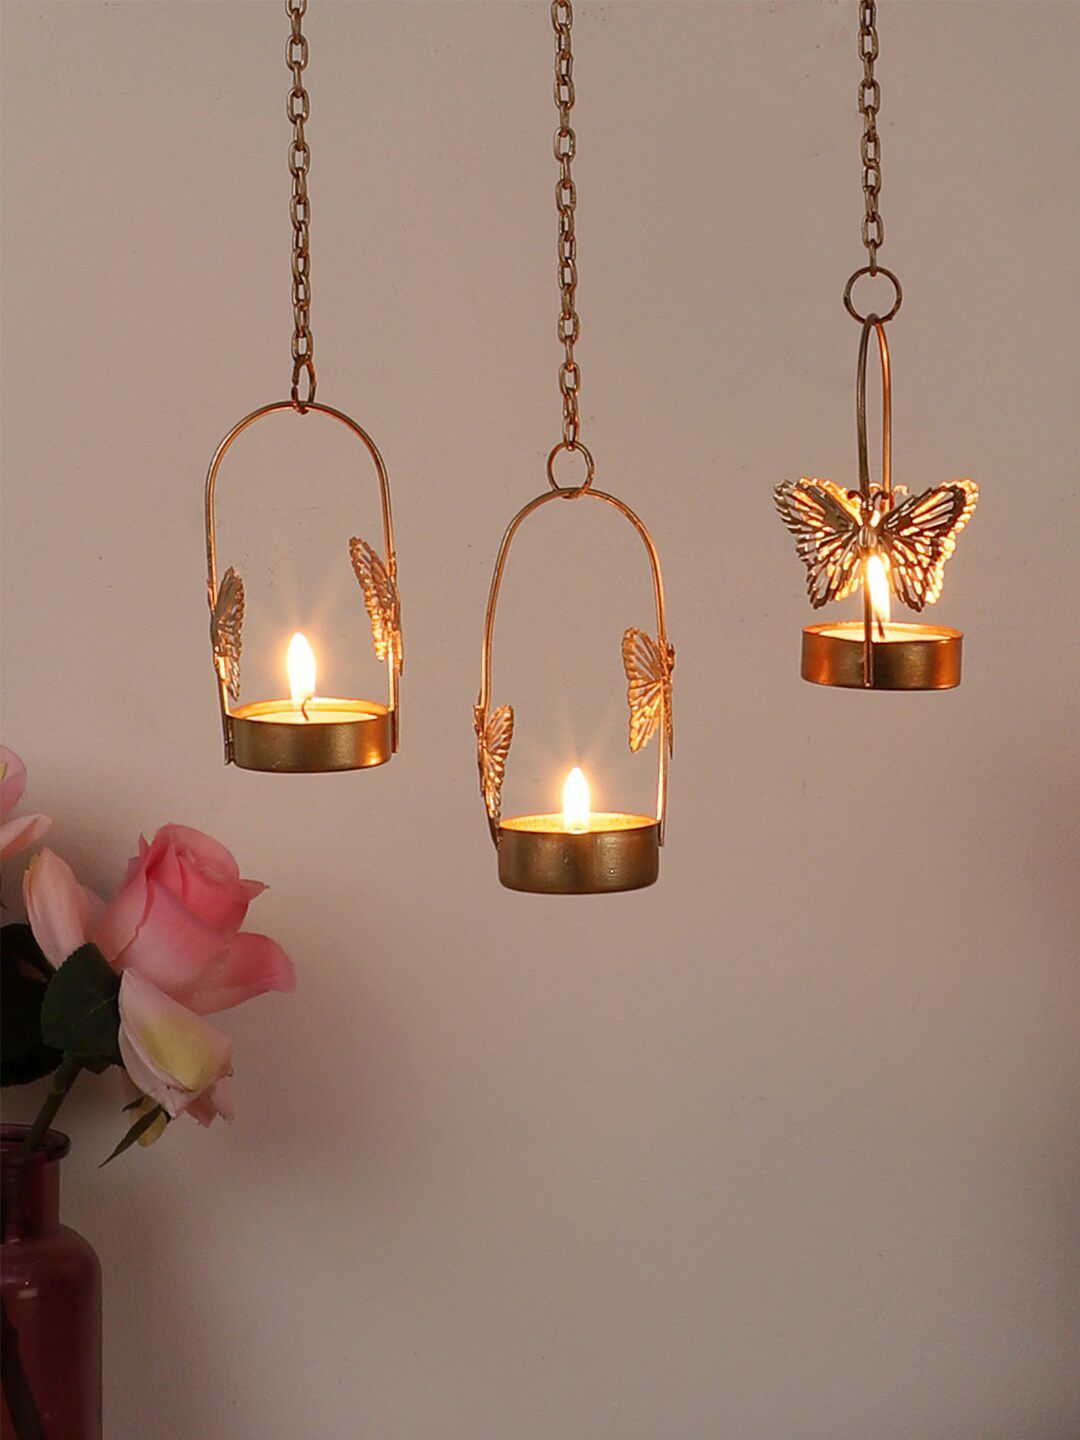 Amaya Decors Set Of 4 Gold-Toned Solid Hanging Butterfly Tealight Holder Price in India